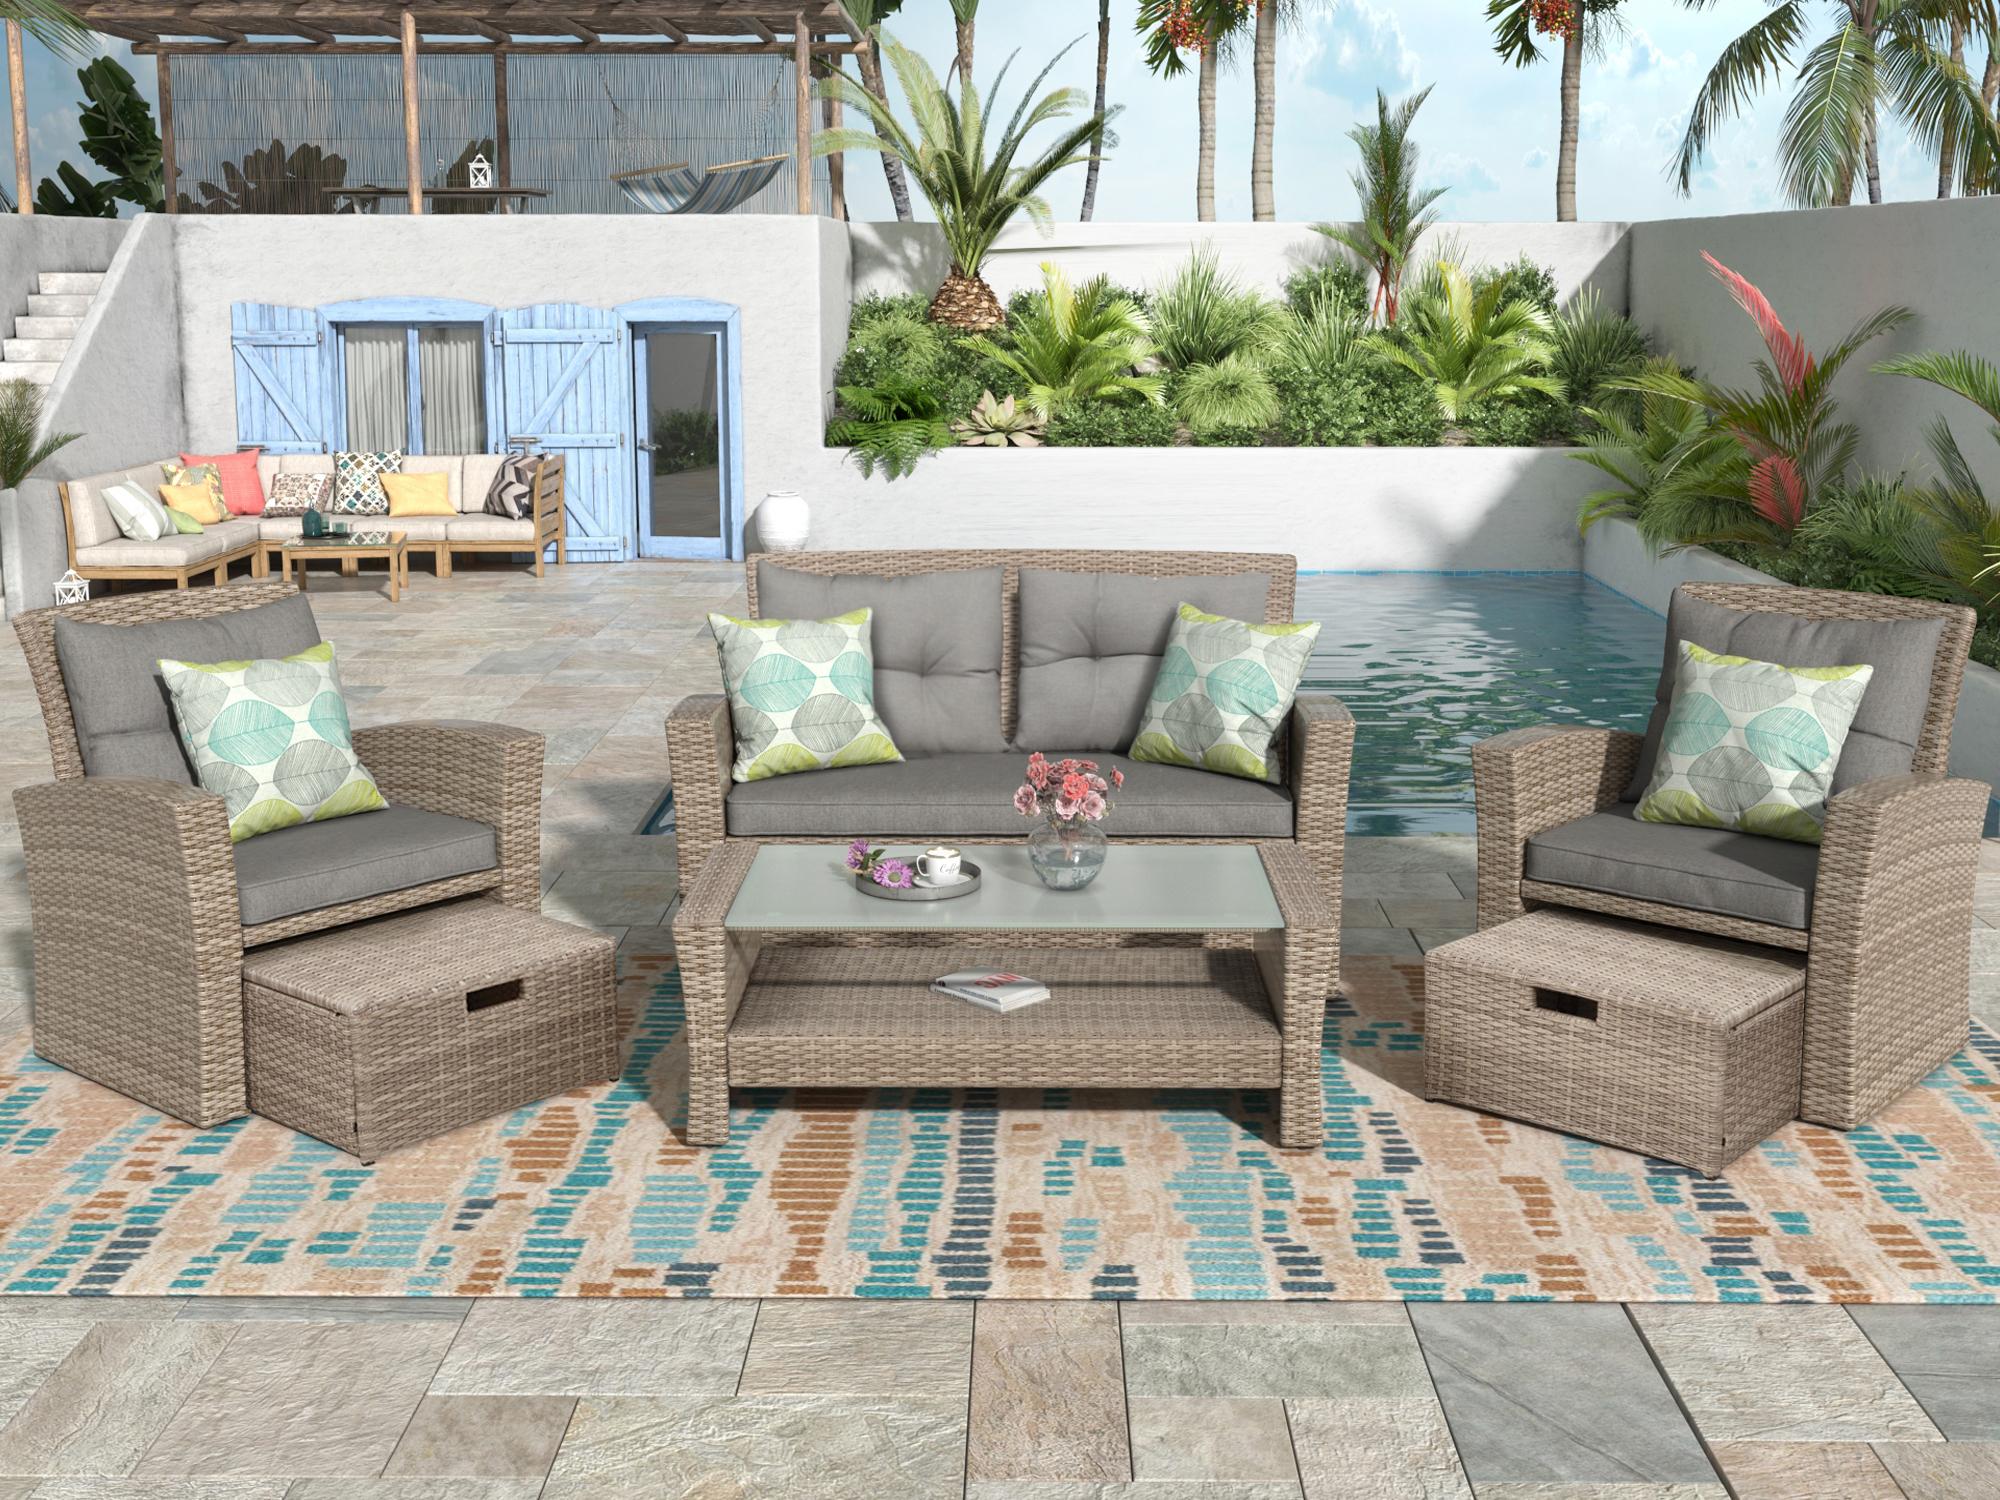 Gray Rattan Patio Sectional Set, SESSLIFE 6-Piece Outdoor Conversation Set with 1 Loveseat, 2 Chairs, 2 Ottomans, 1 Coffee Table, Patio Couches Sets for Porch Garden Balcony - image 2 of 9